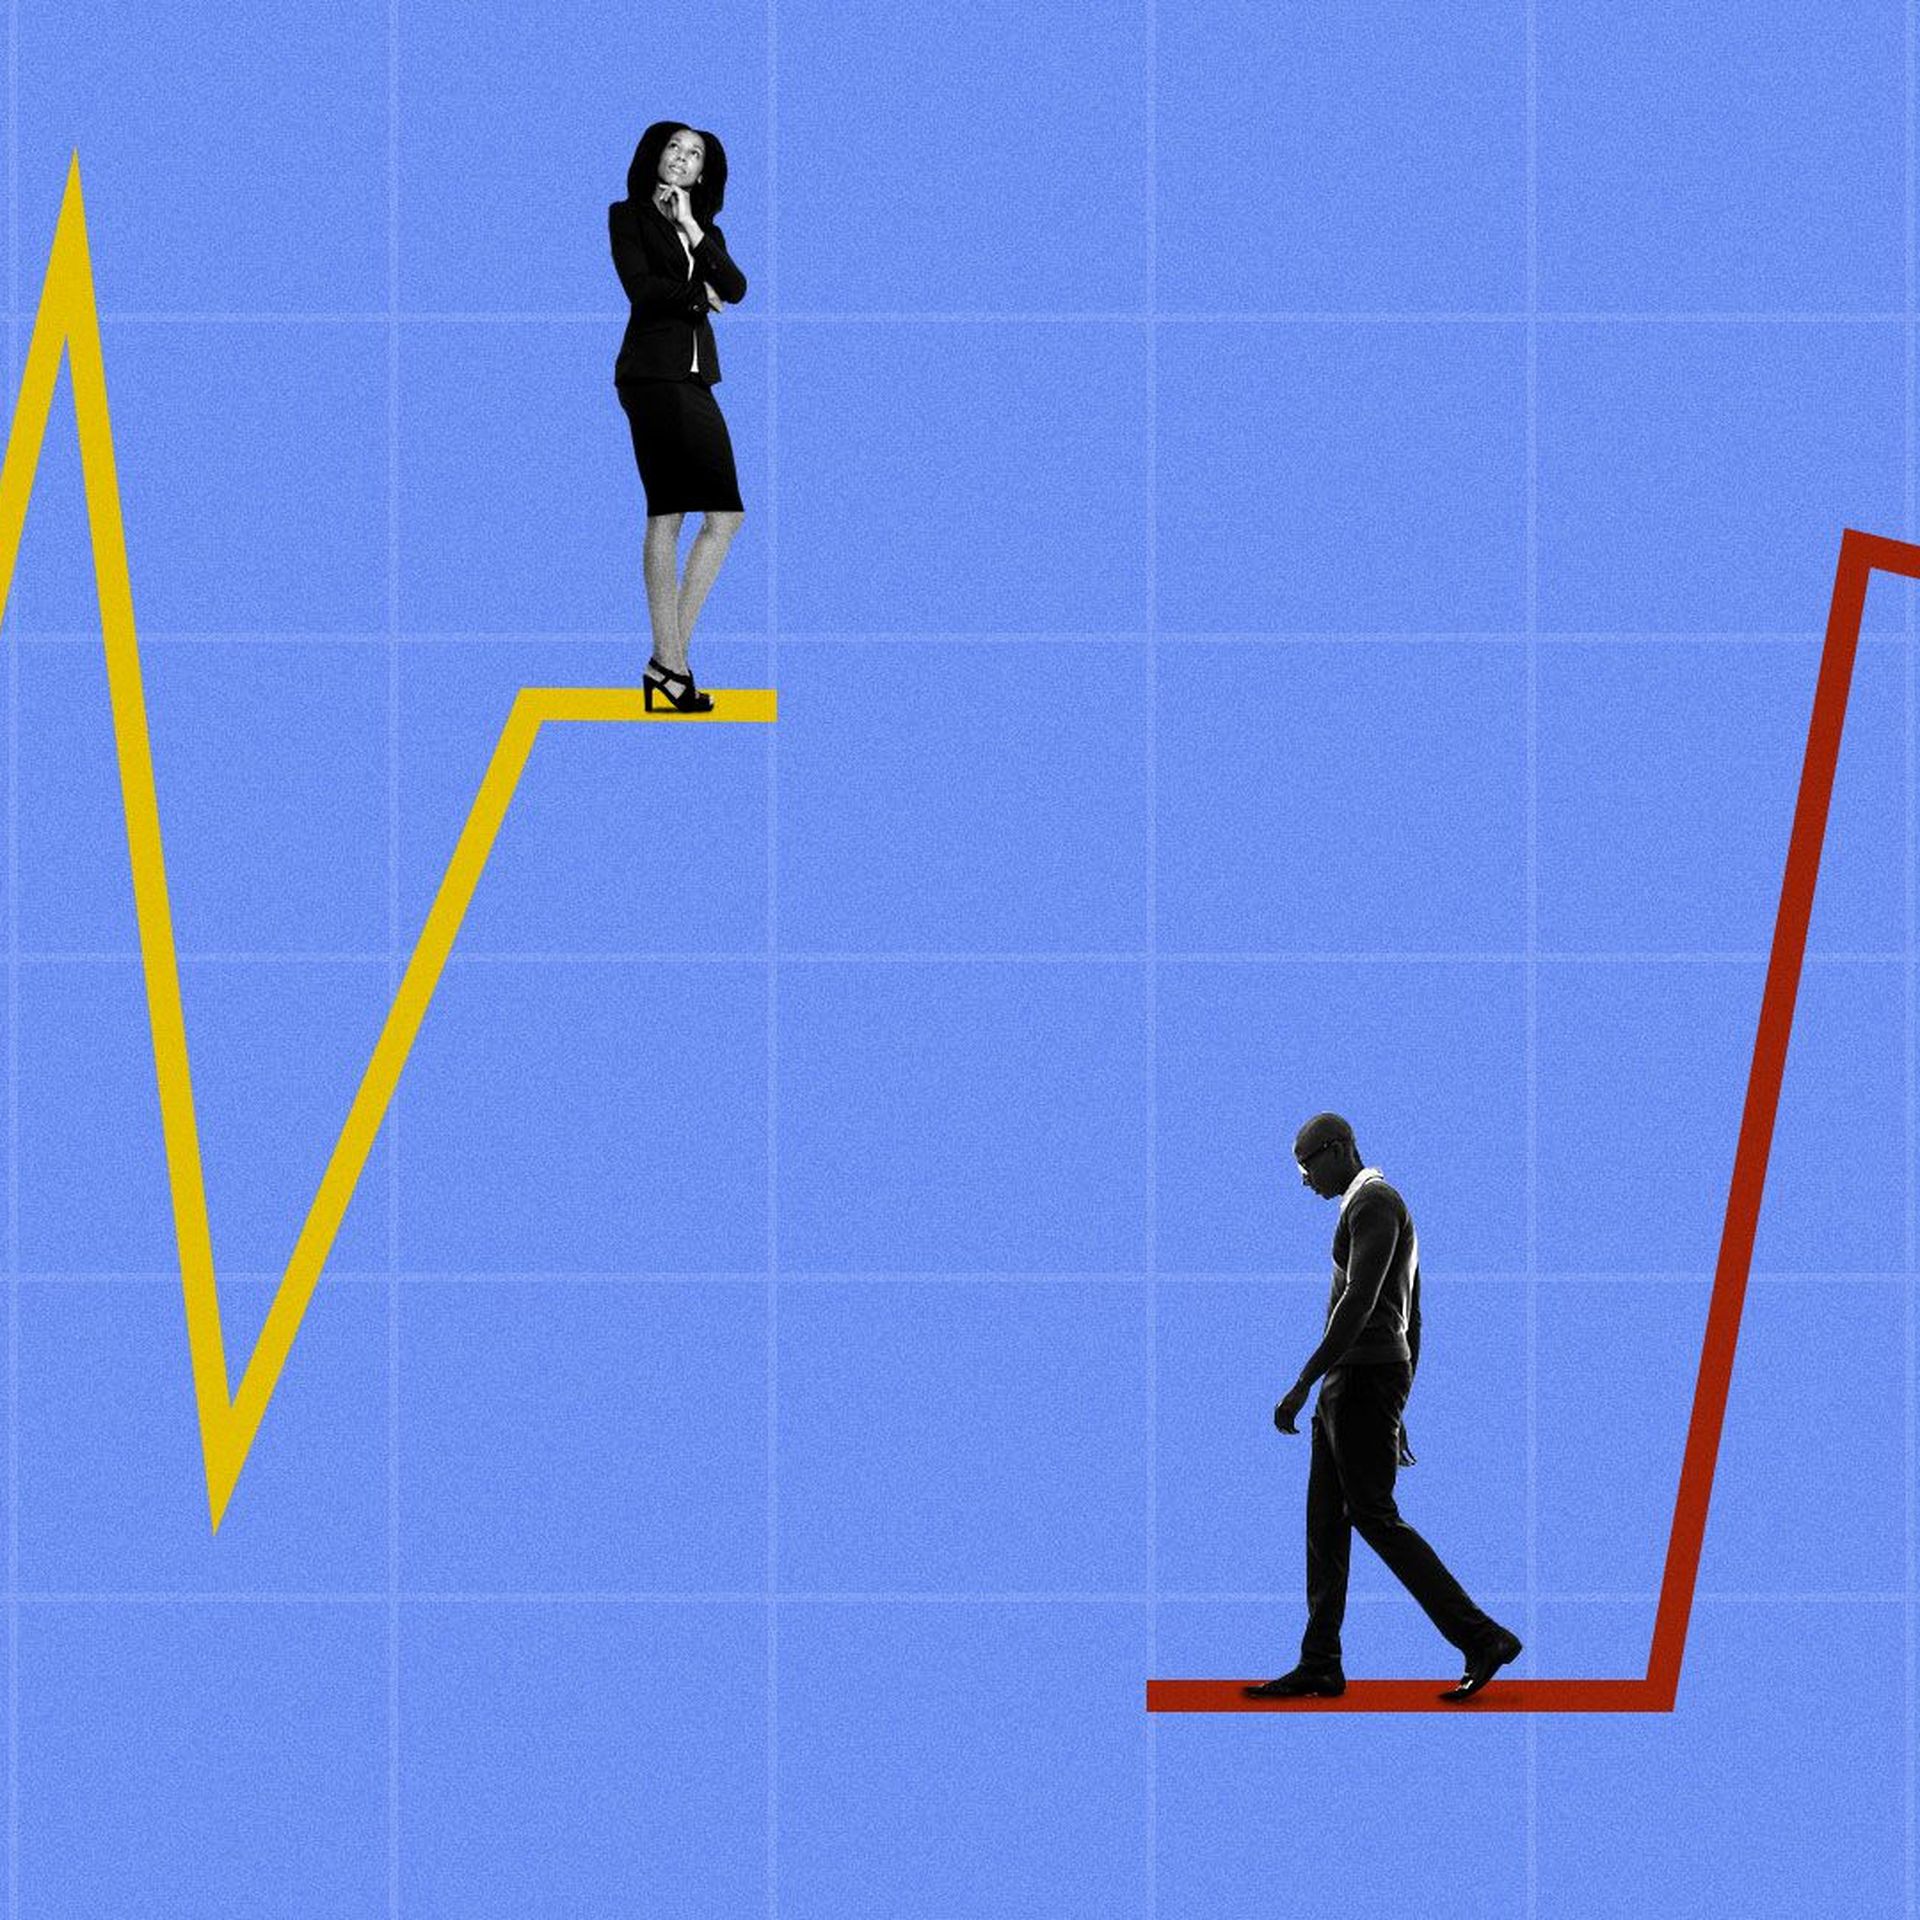 Illustration of two people standing at edge of line graph one high, one low